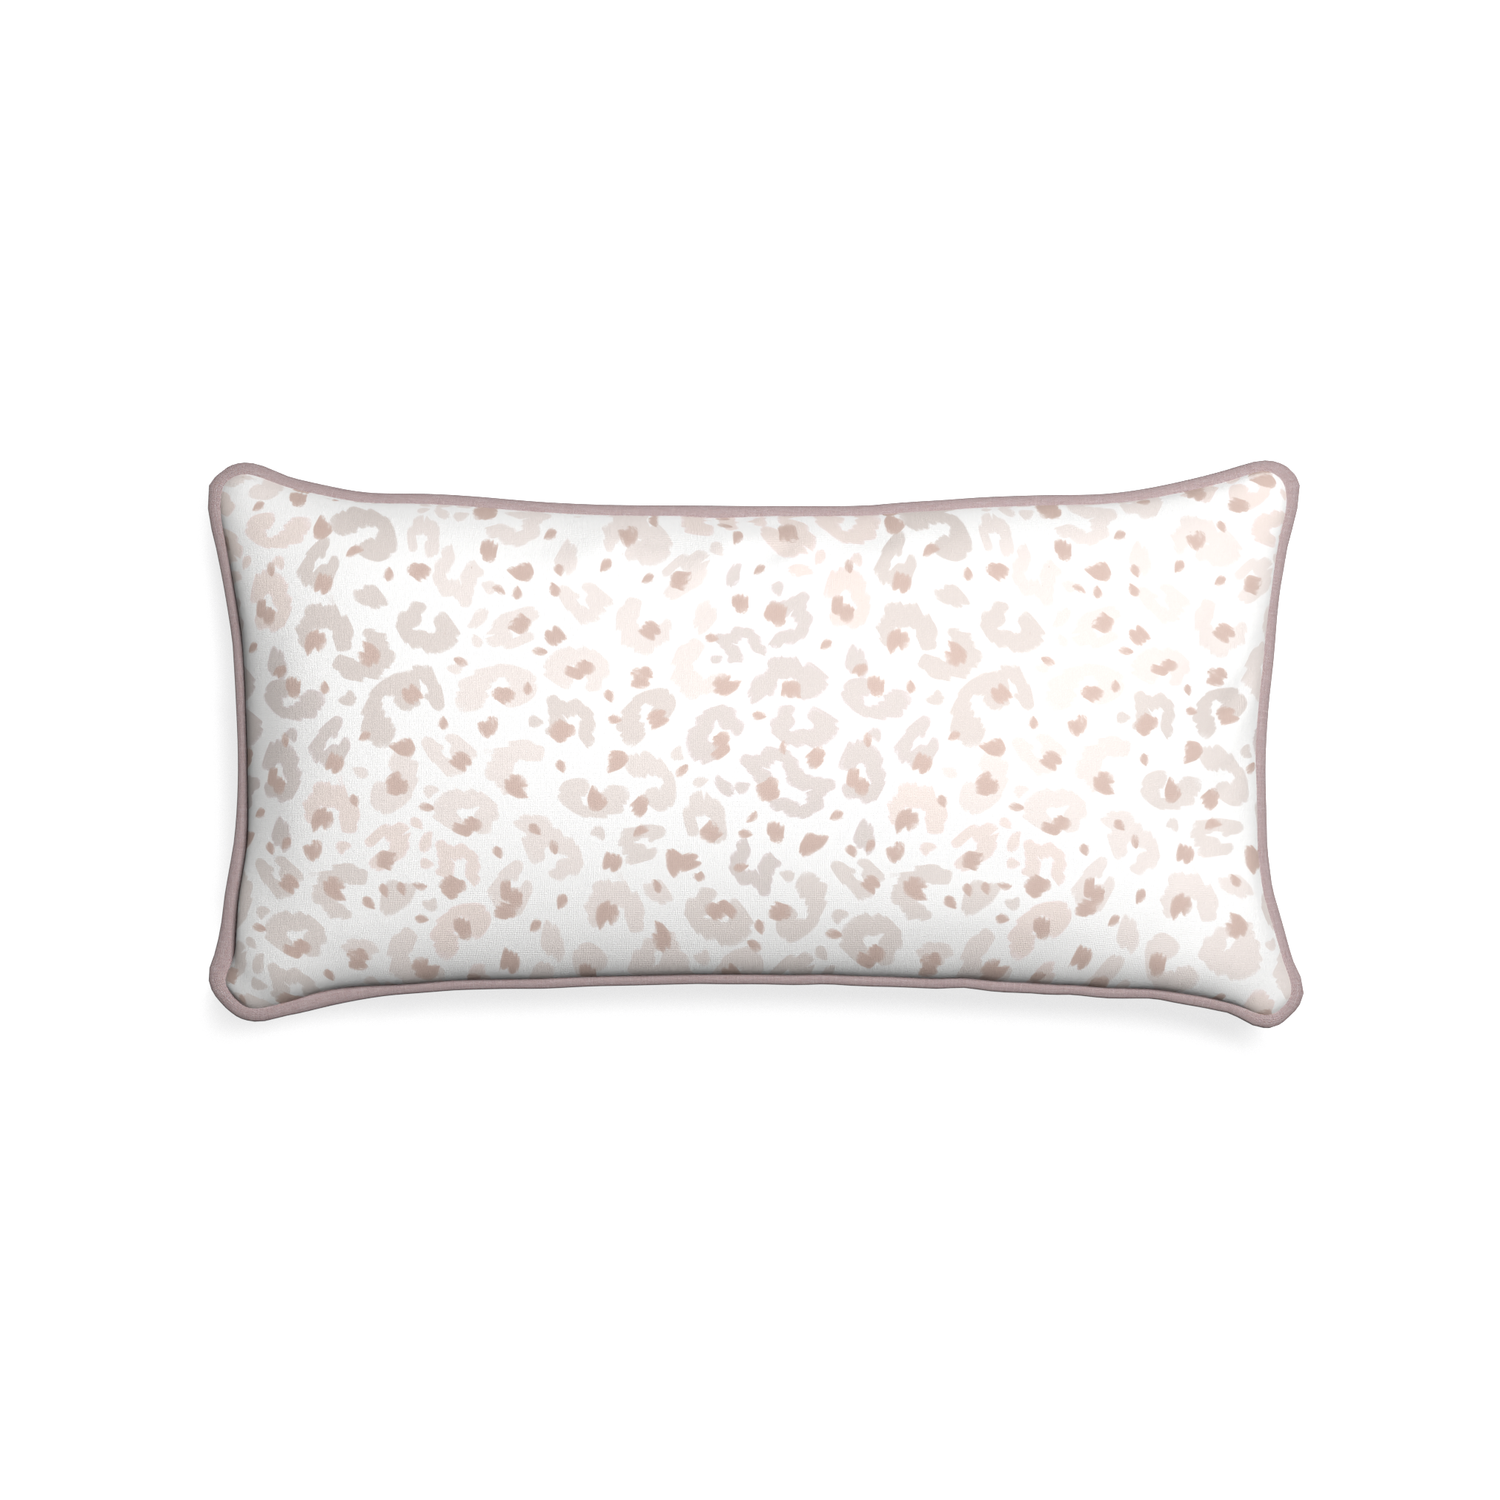 Midi-lumbar rosie custom beige animal printpillow with orchid piping on white background